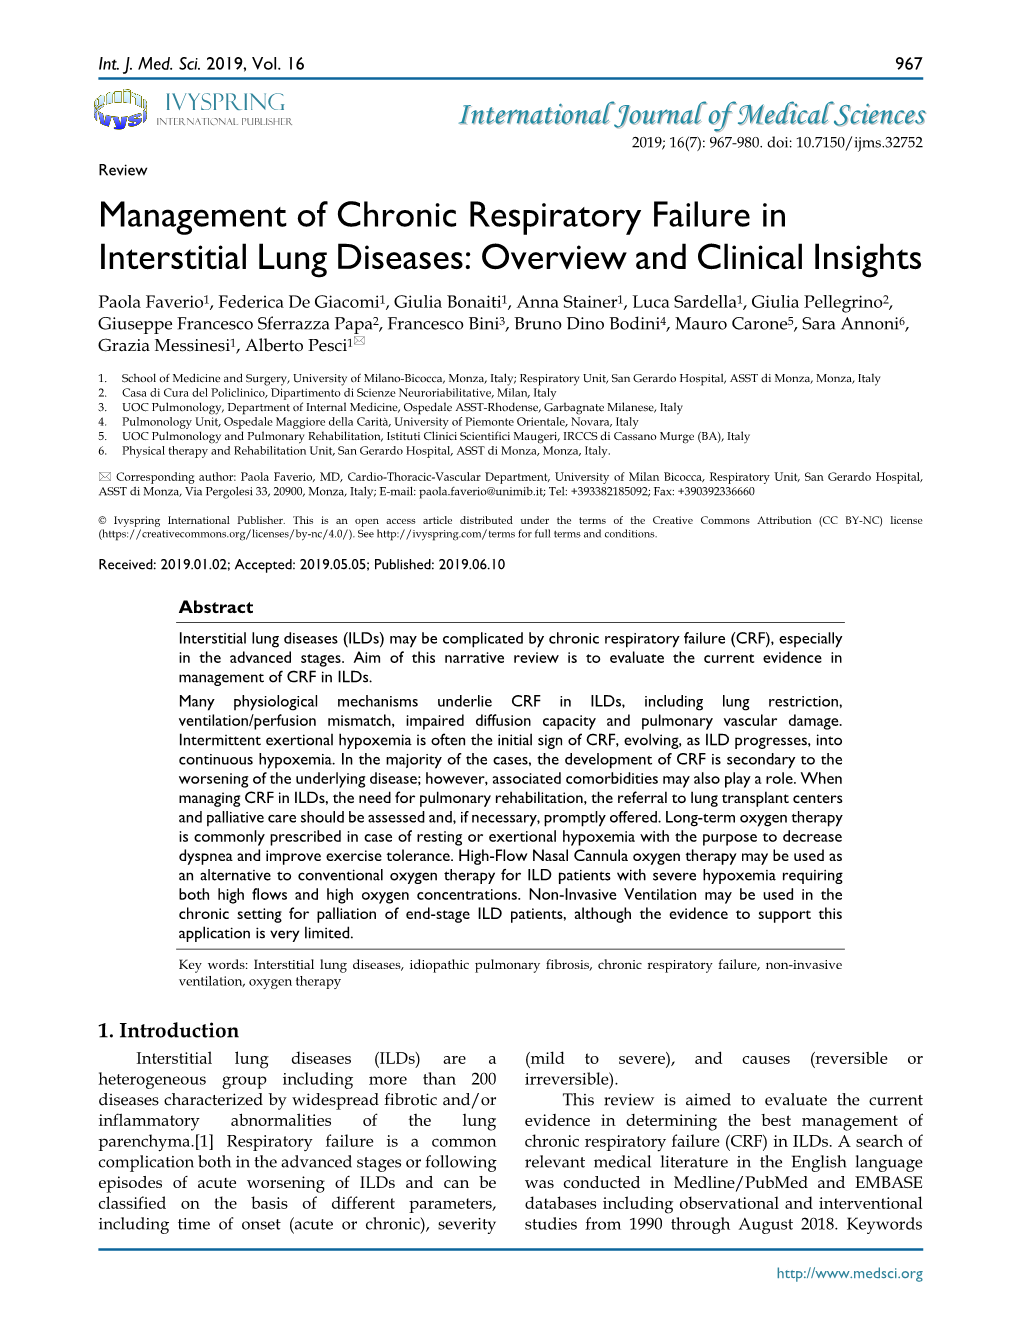 Management of Chronic Respiratory Failure in Interstitial Lung Diseases